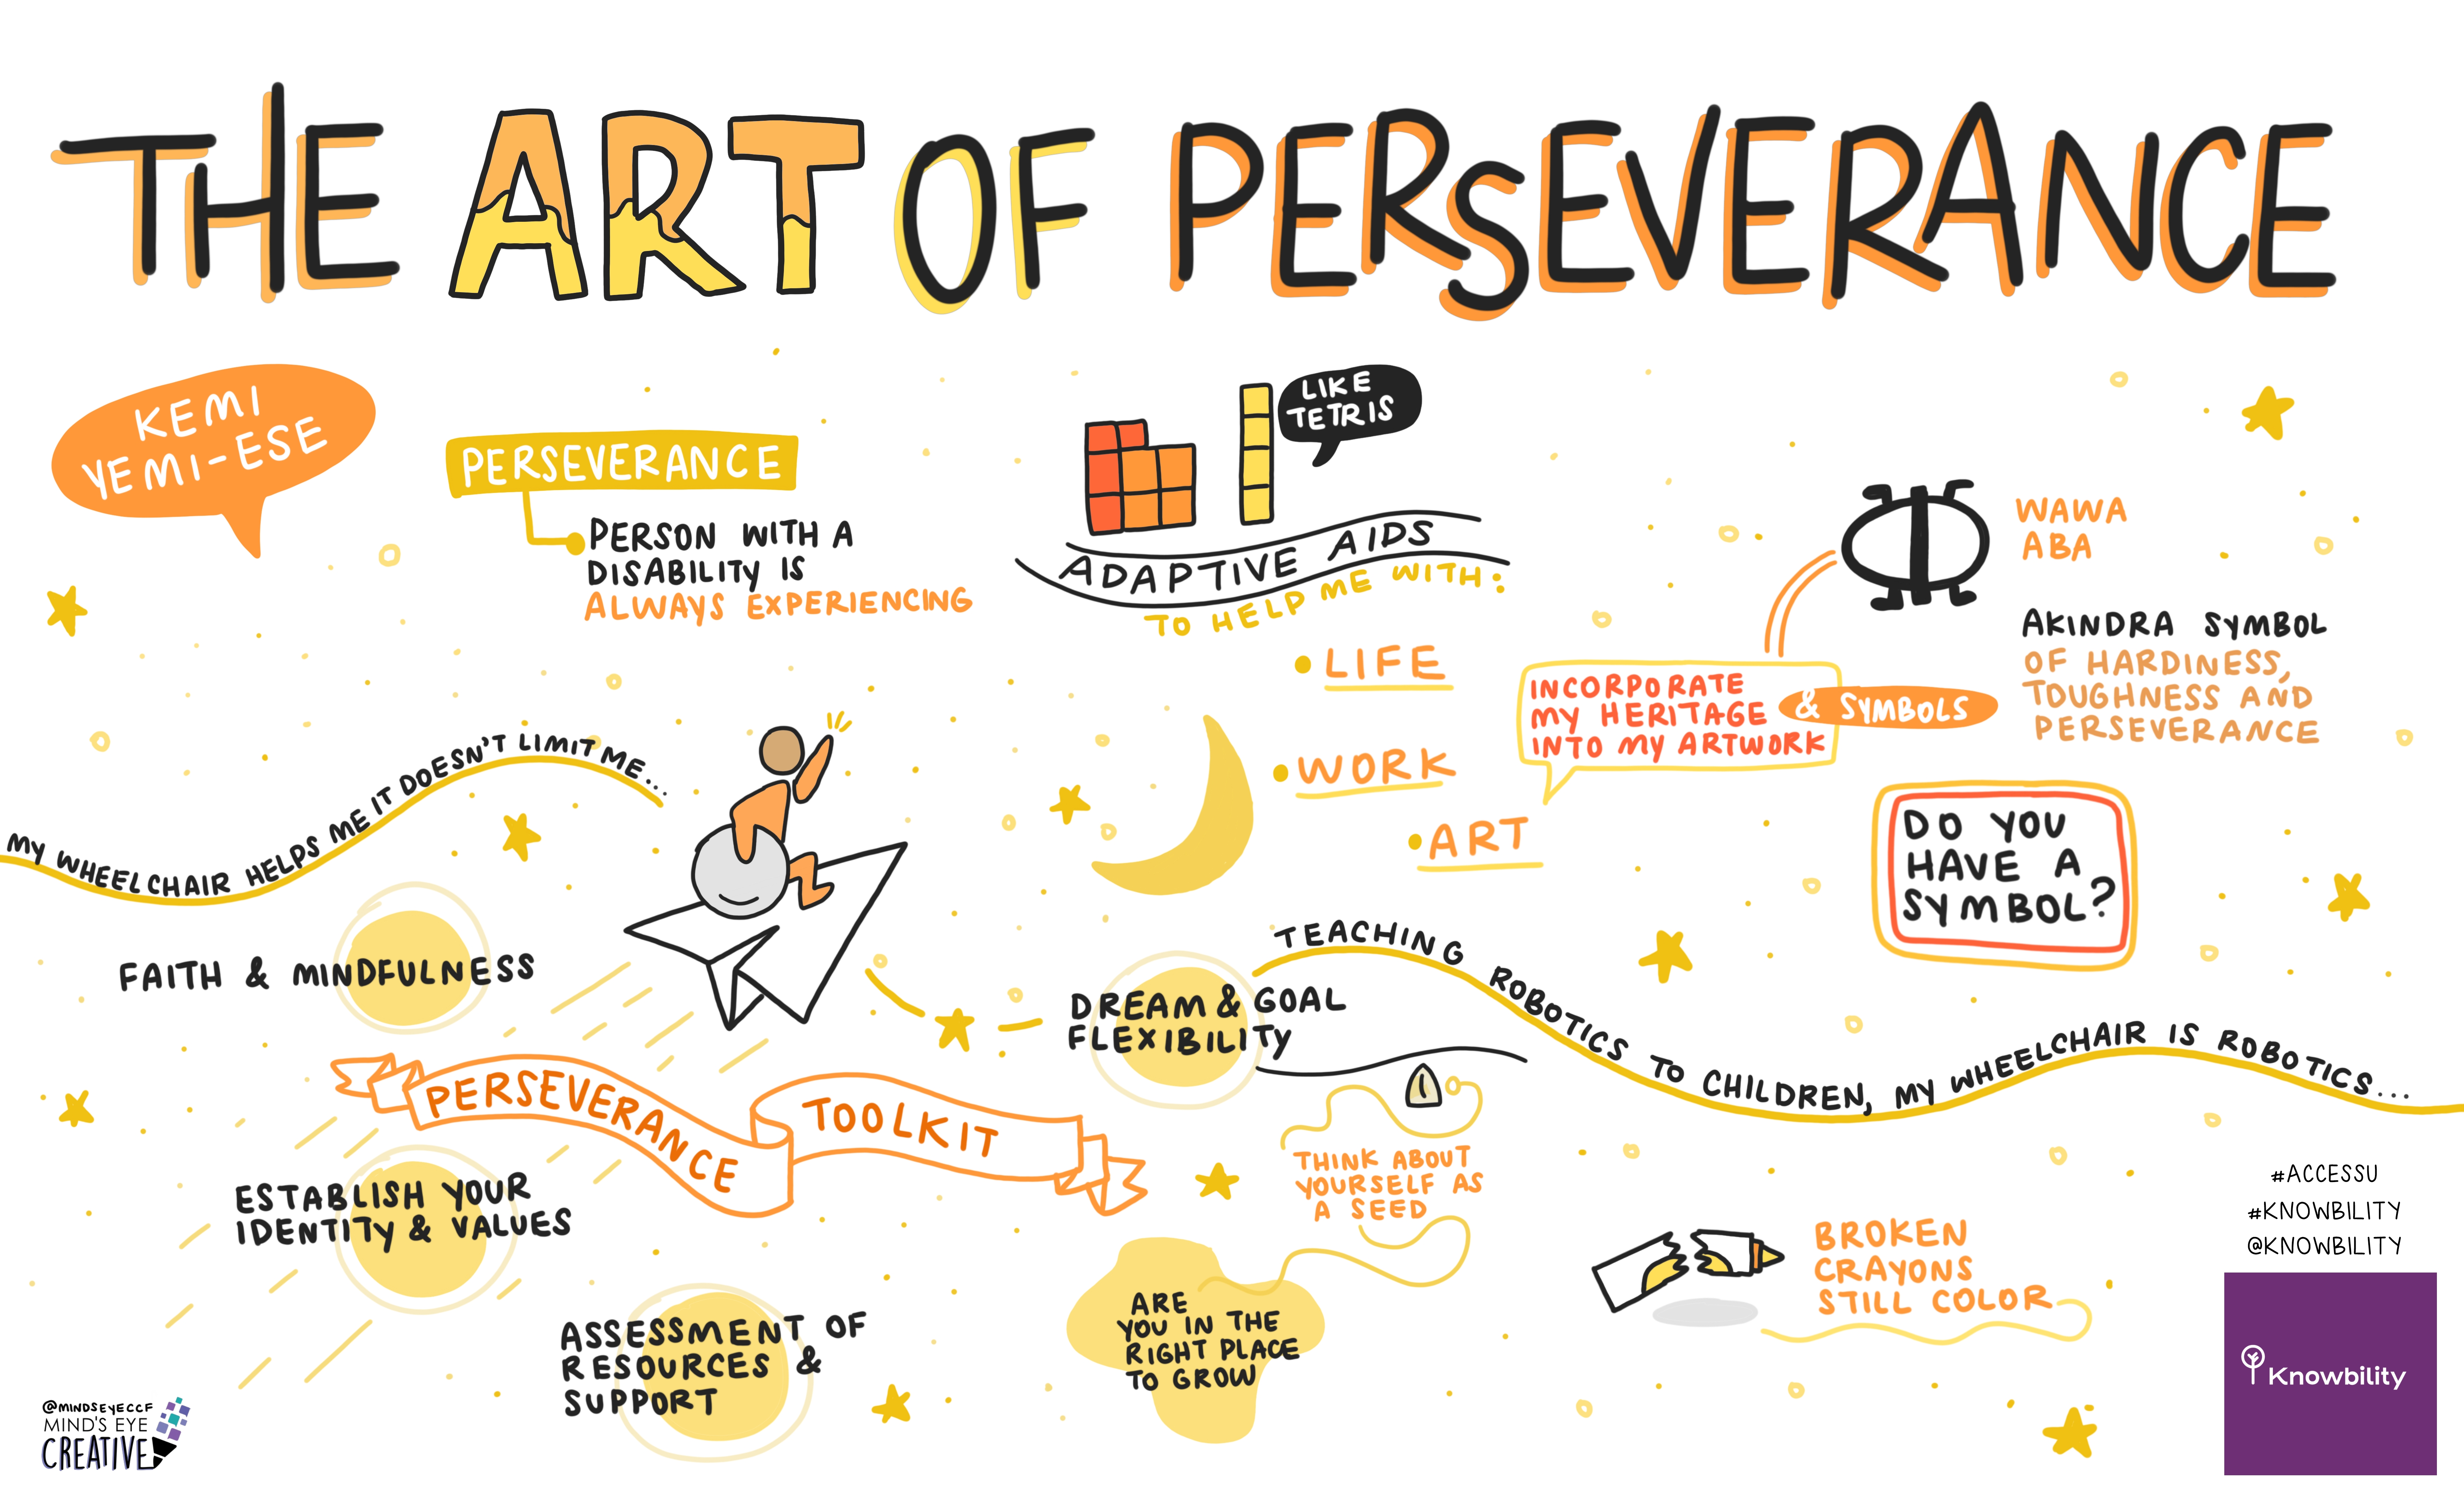 Sketchnote for the presentation titled, “The Art of Perseverance” by Kemi Yemi-Ese at the AccessU event. 